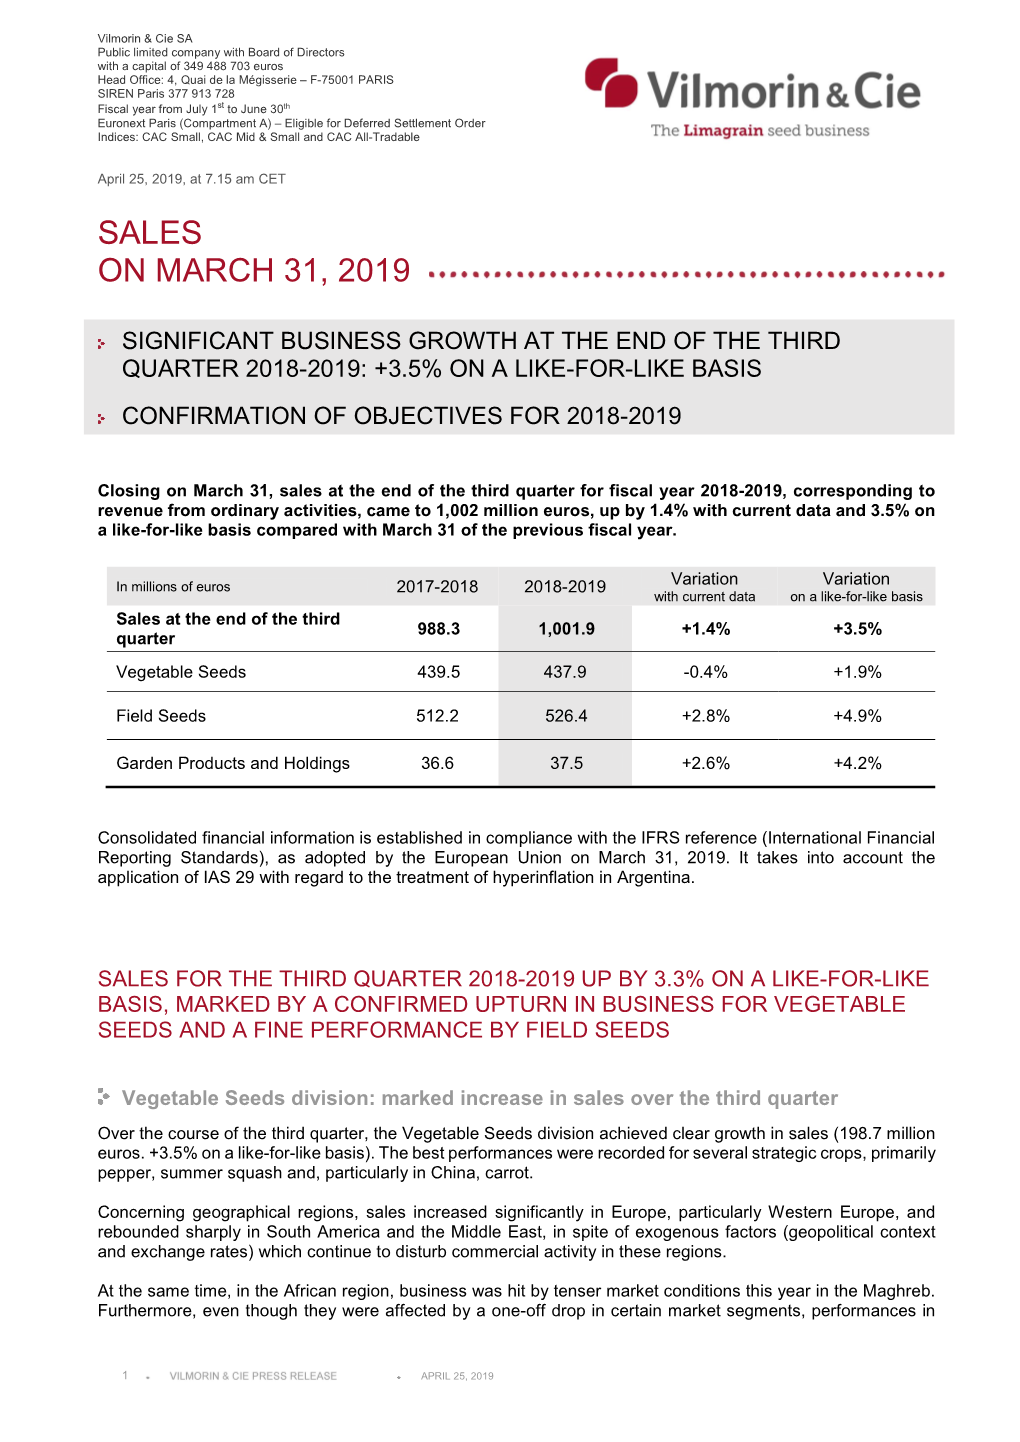 Sales on March 31, 2019